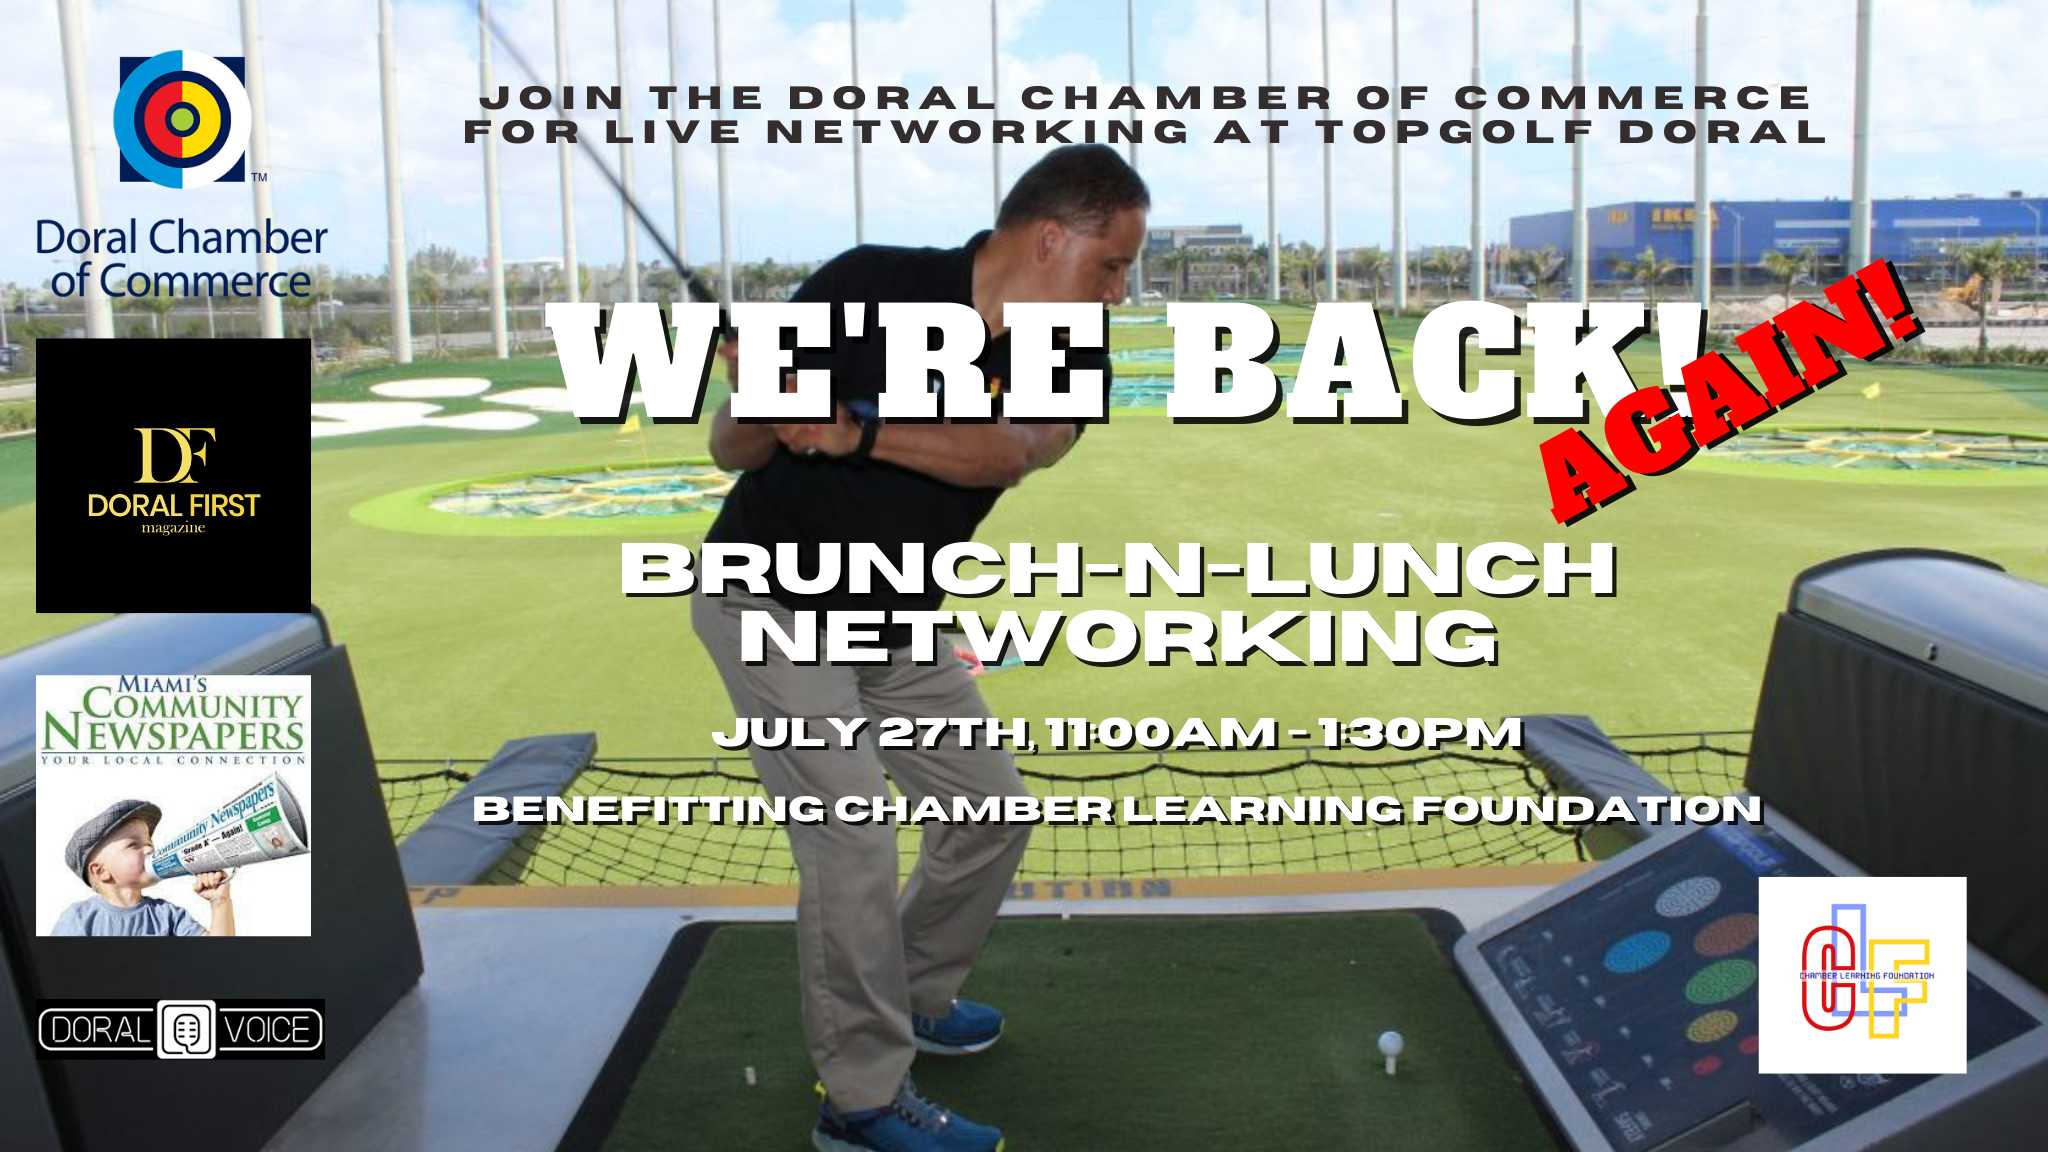 Wide Networking Brunch-n-Lunch at Topgolf Miami-Doral. Doral Chamber of Commerce and Miami's Community Newspapers.